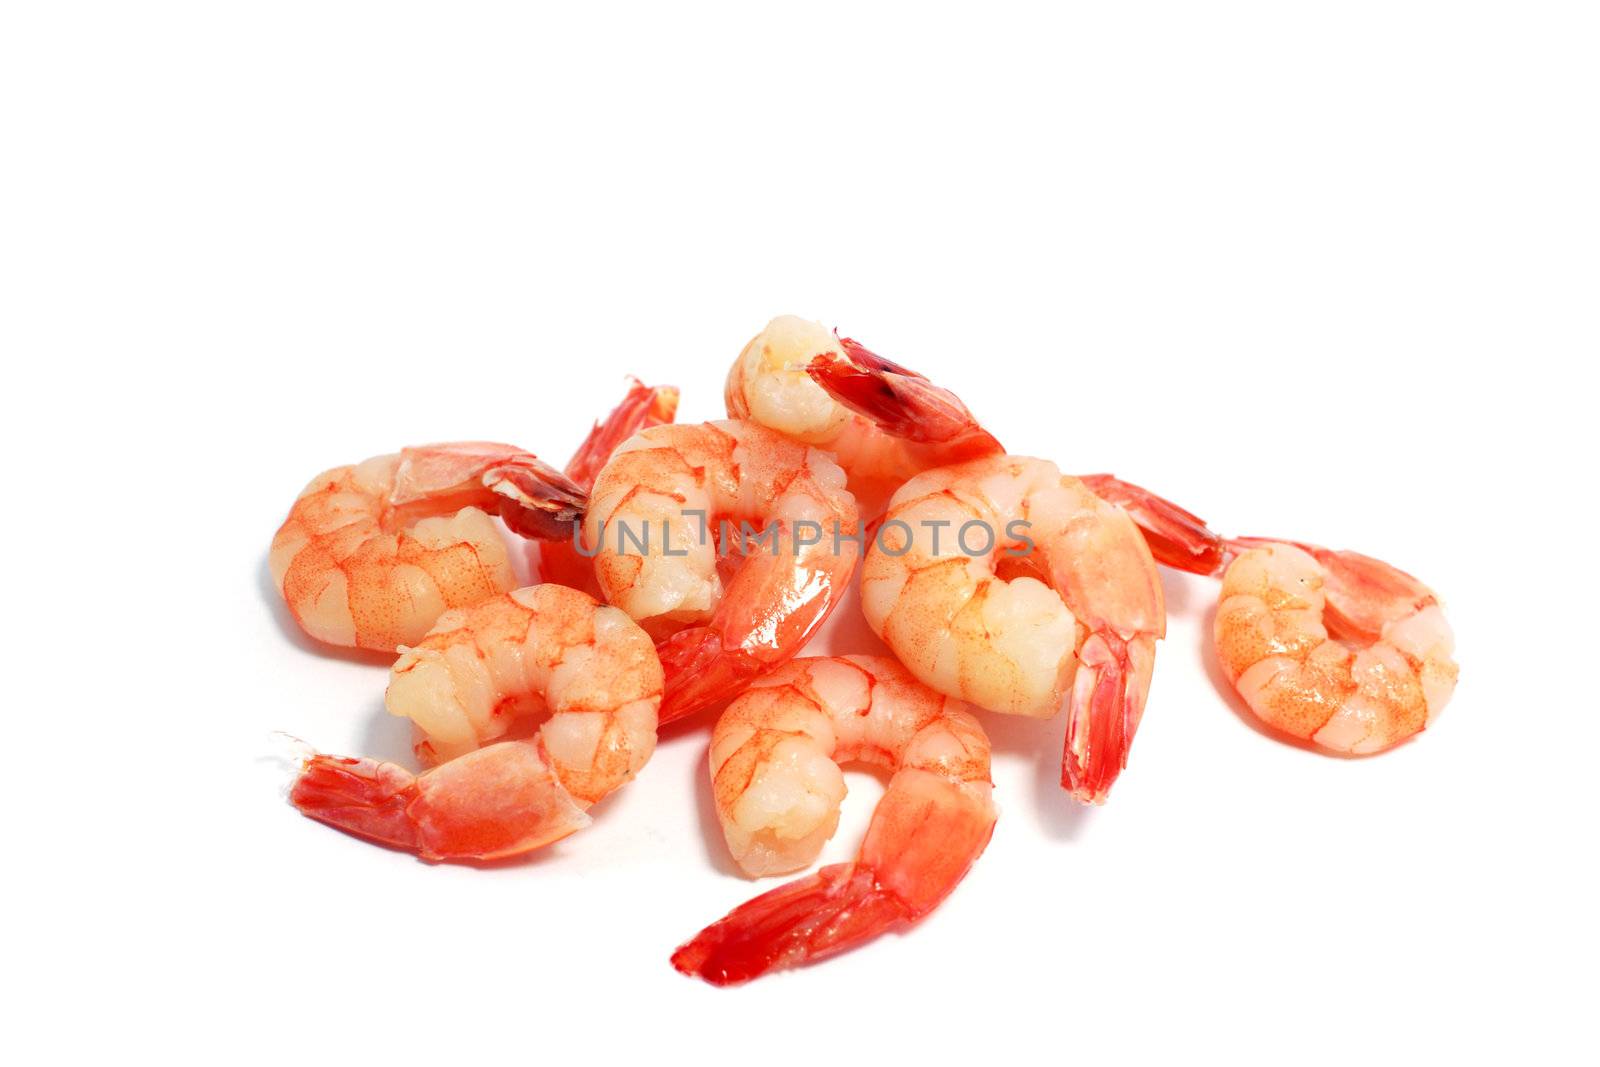 many delicious boiled shrimps on white